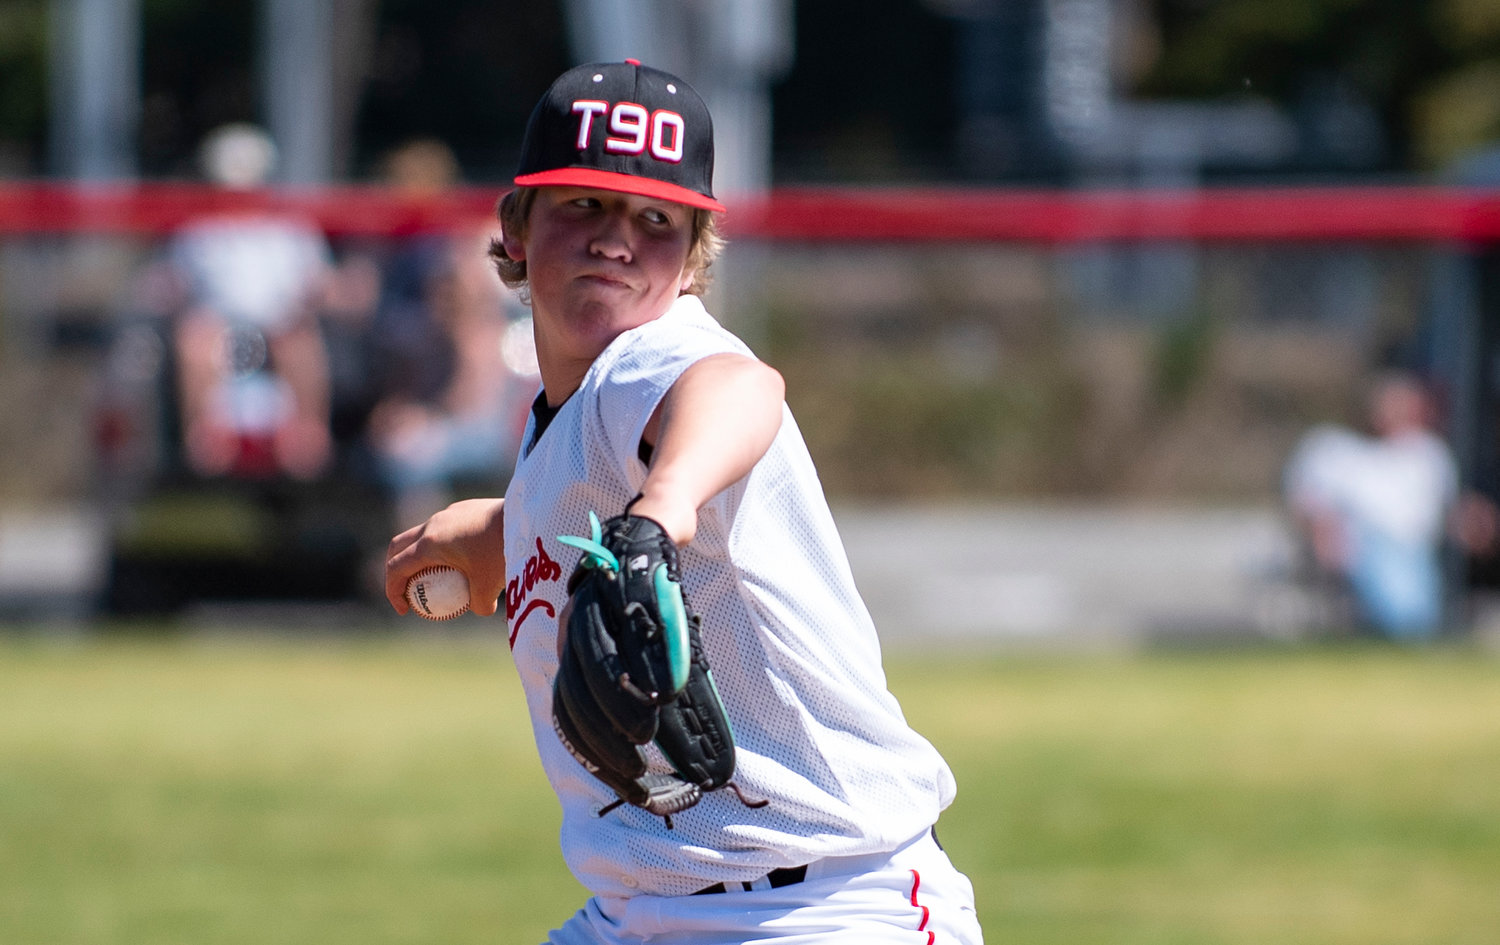 Tenino's Easton Snider winds up to deliver a pitch to a Hoquiam batter on Saturday.